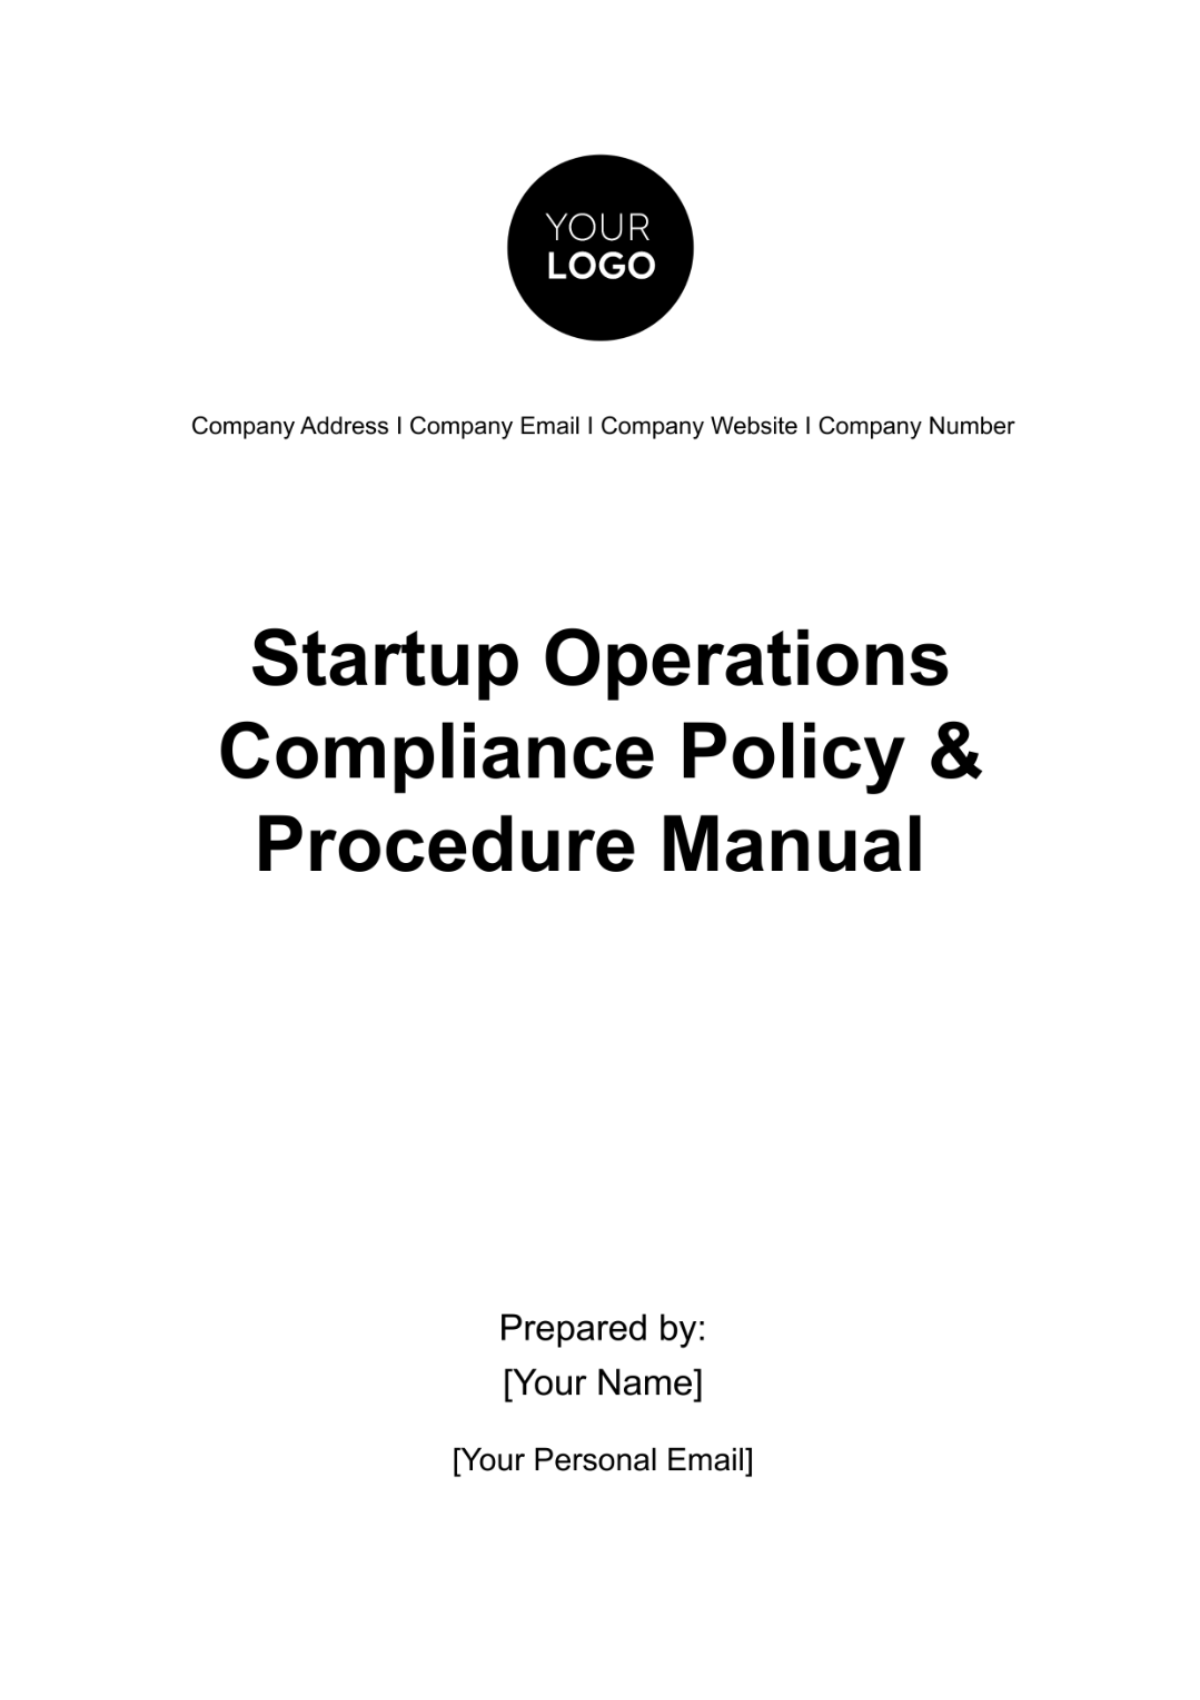 Startup Operations Compliance Policy & Procedure Manual Template